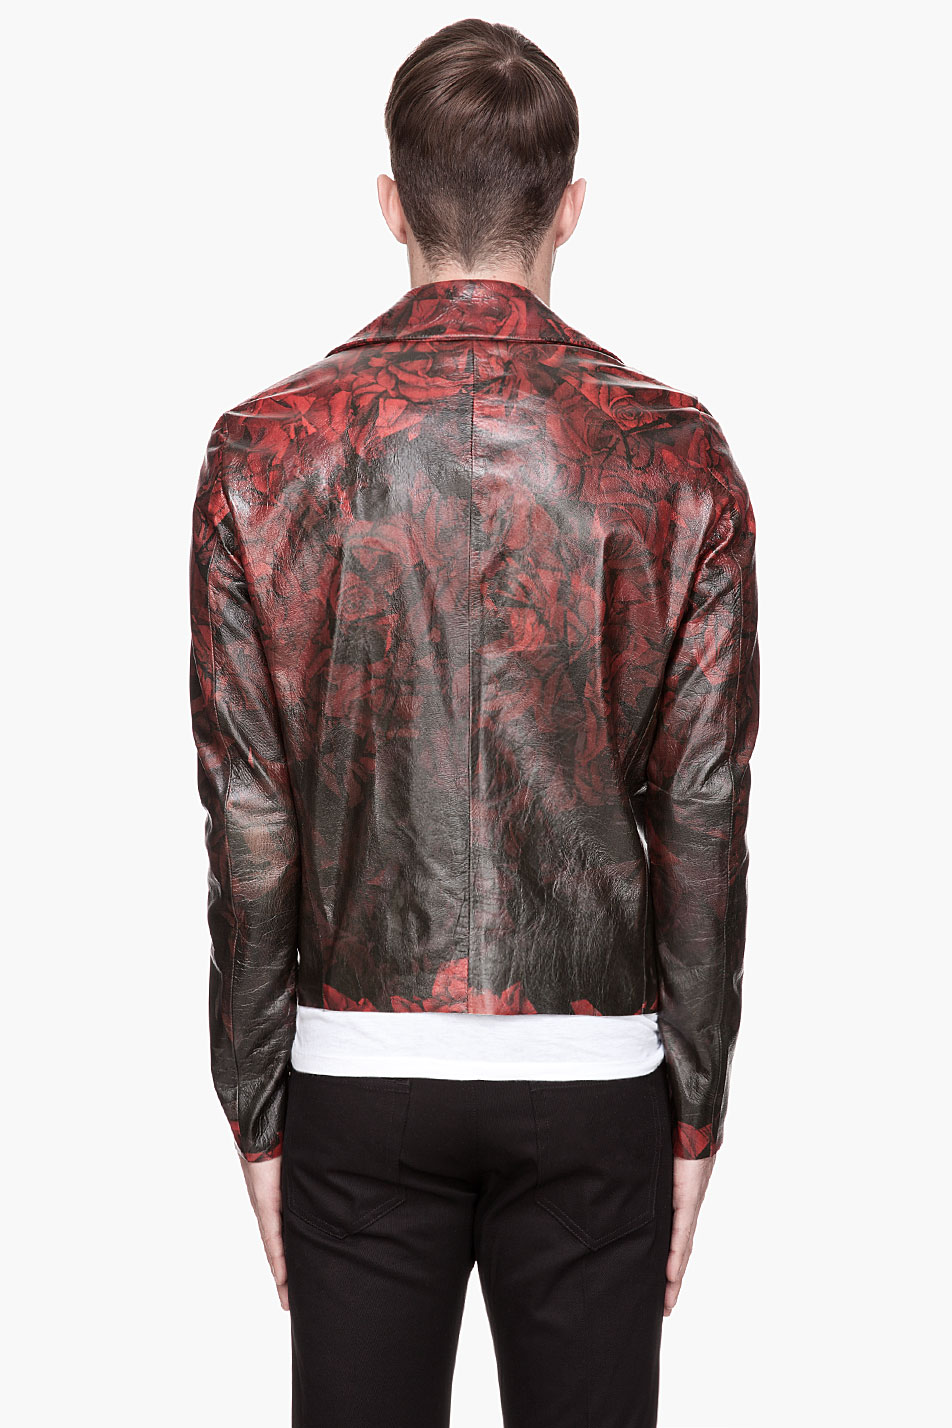 Paul Smith Red and Black Leather Gradient Rose Biker Jacket for Men